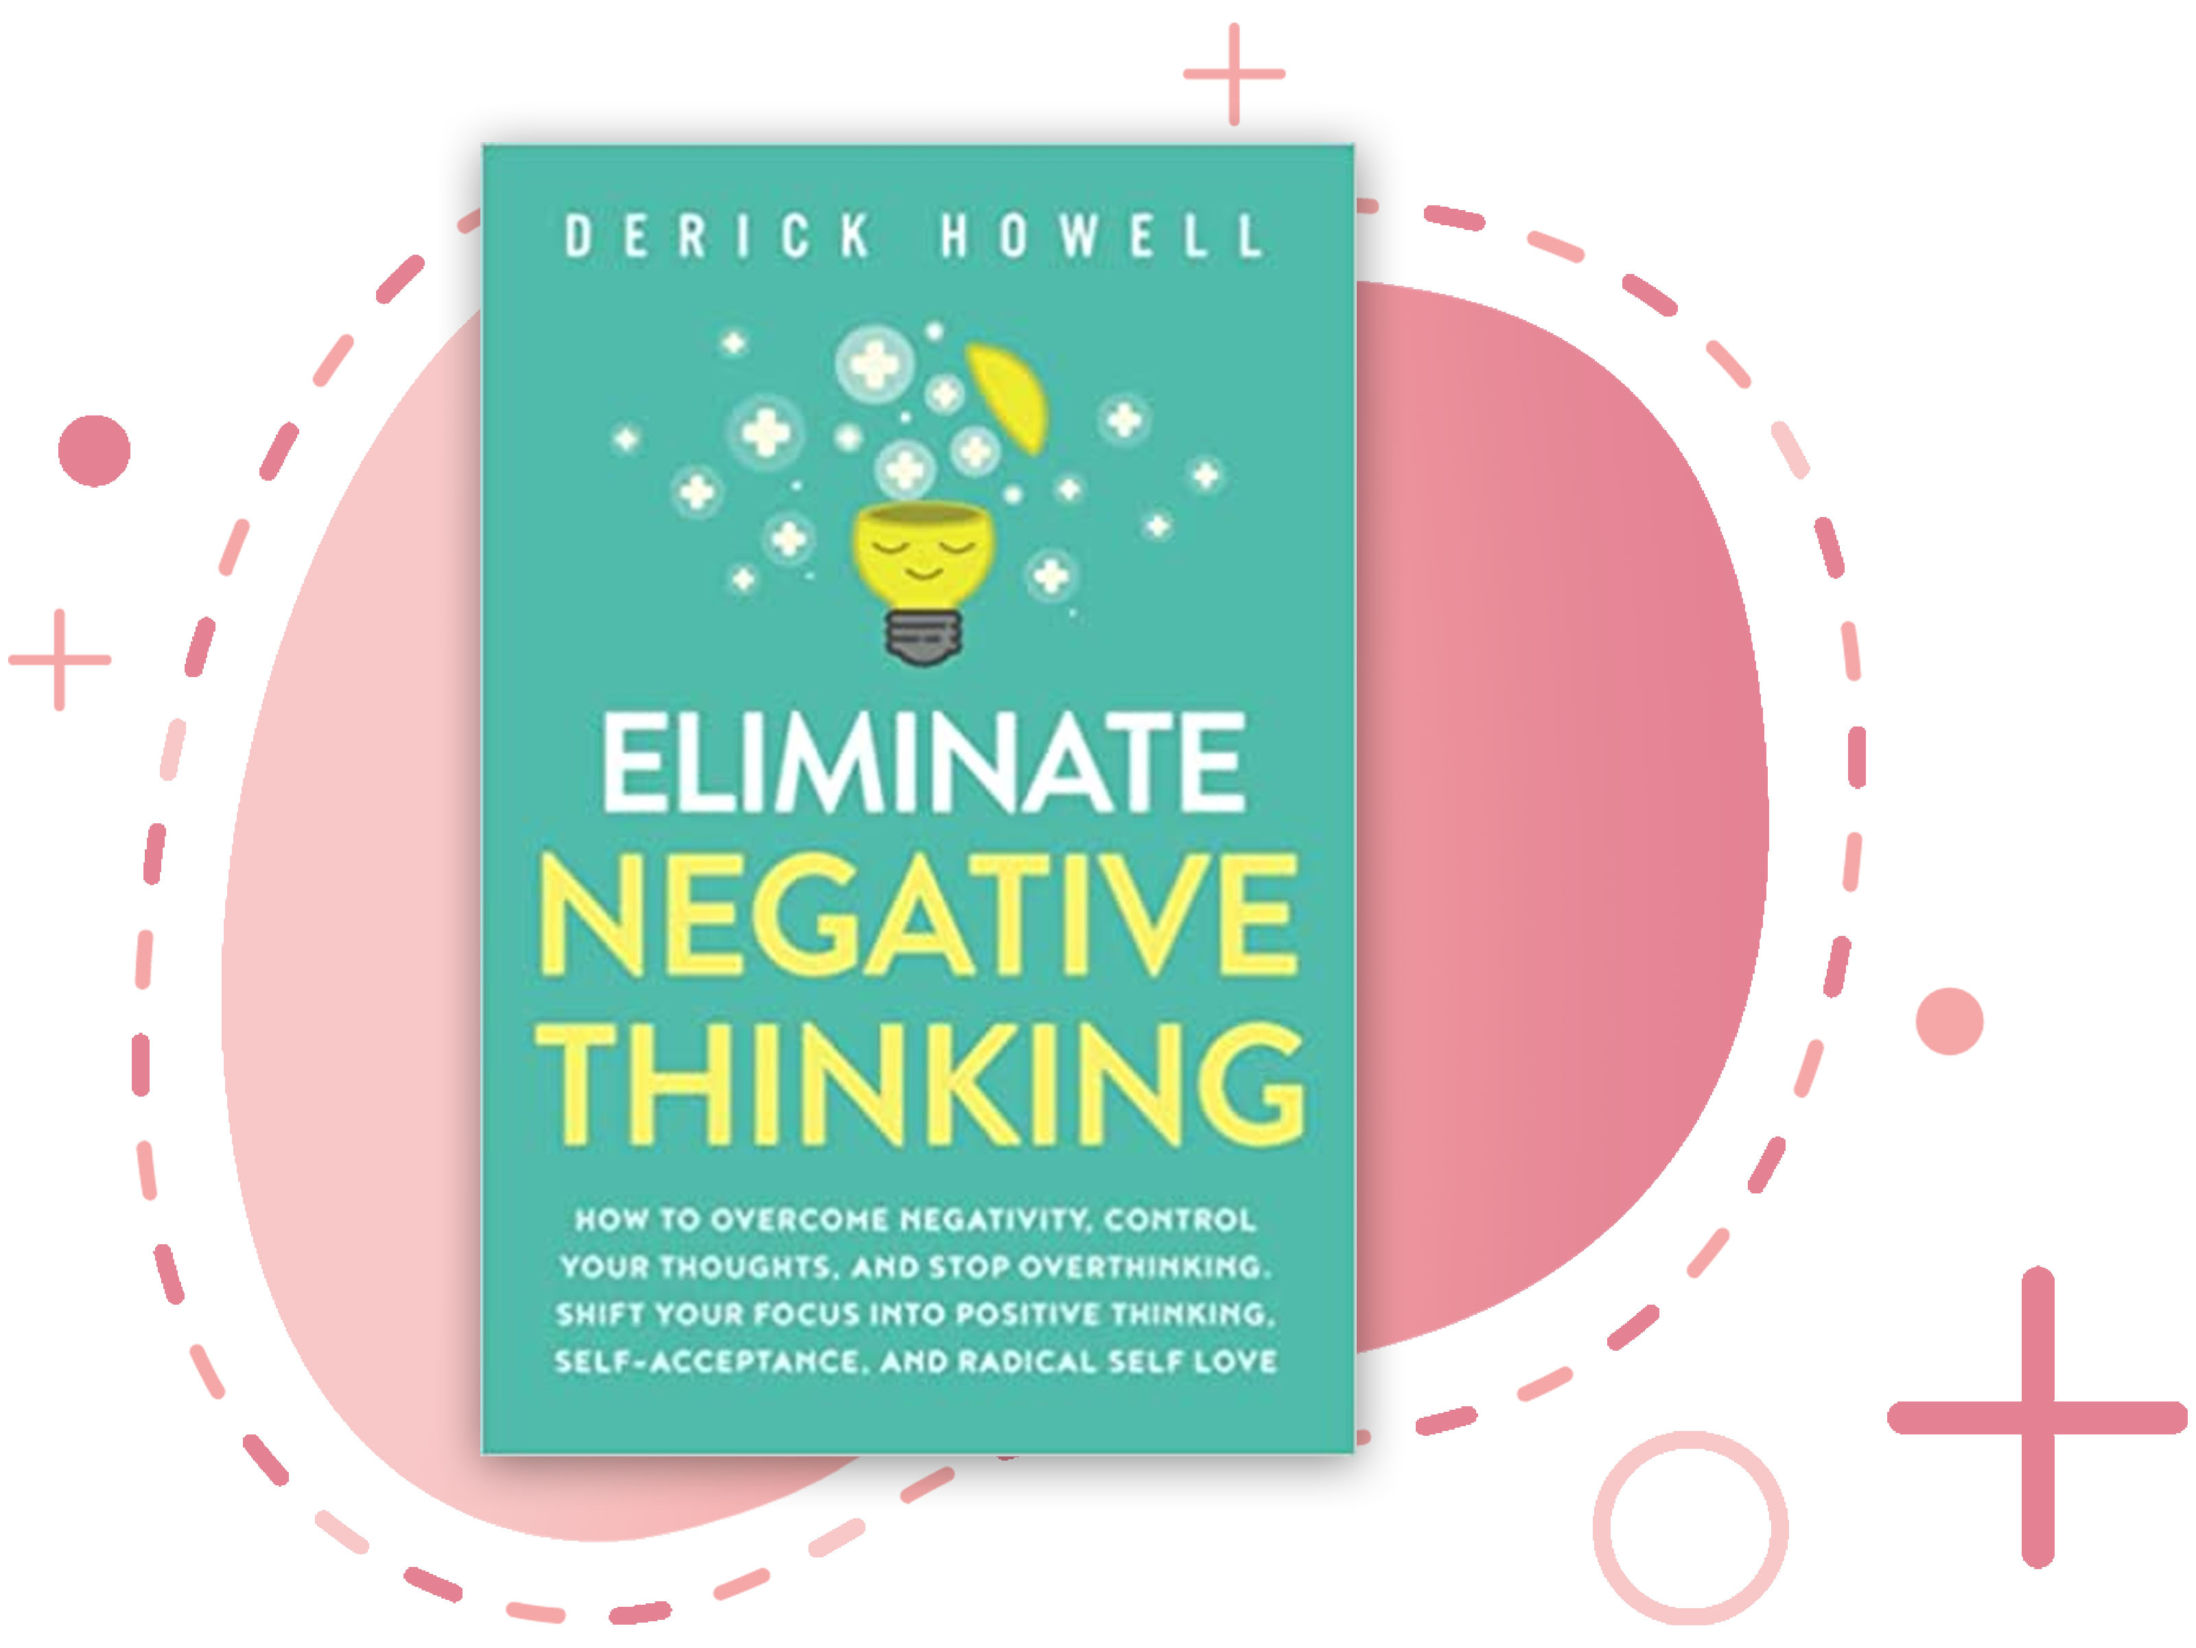 Eliminate Negative Thinking by Derick Howell